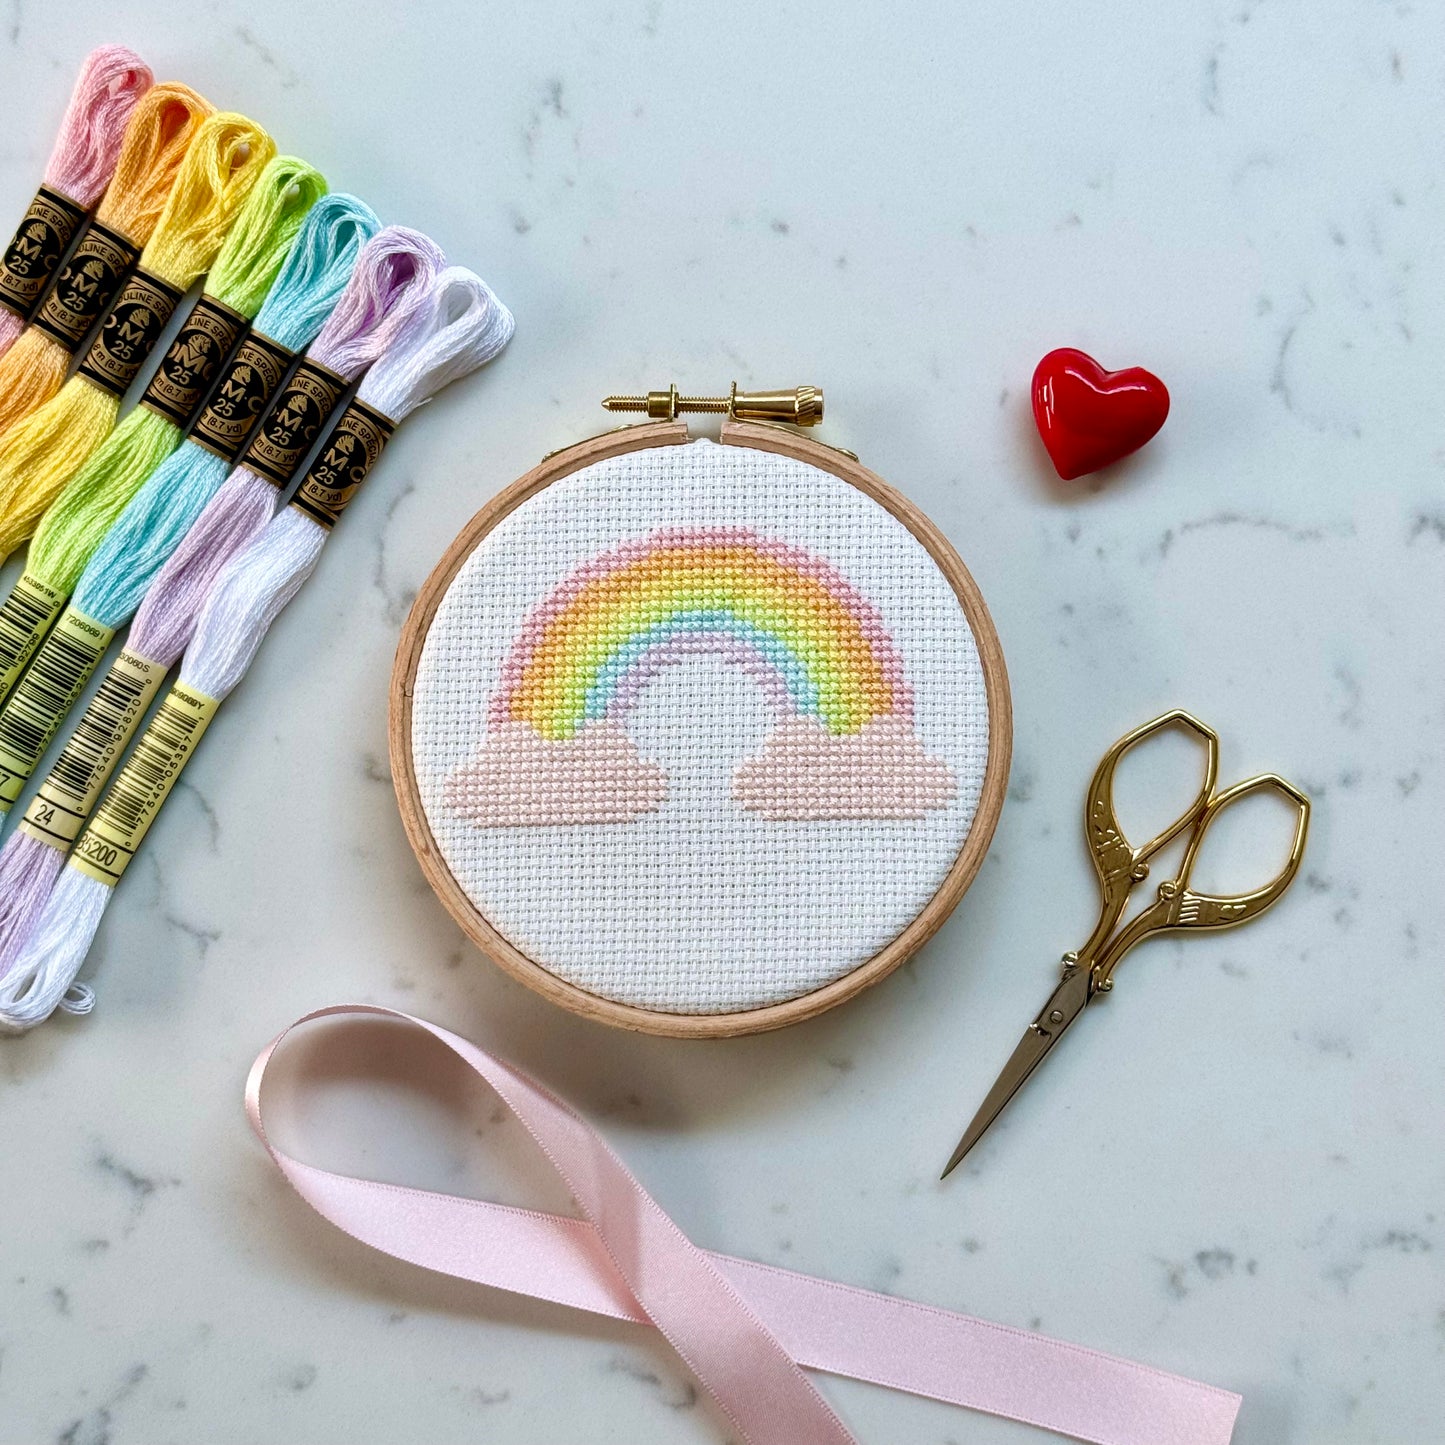 Over the Rainbow Cross Stitch Pattern – PDF Download